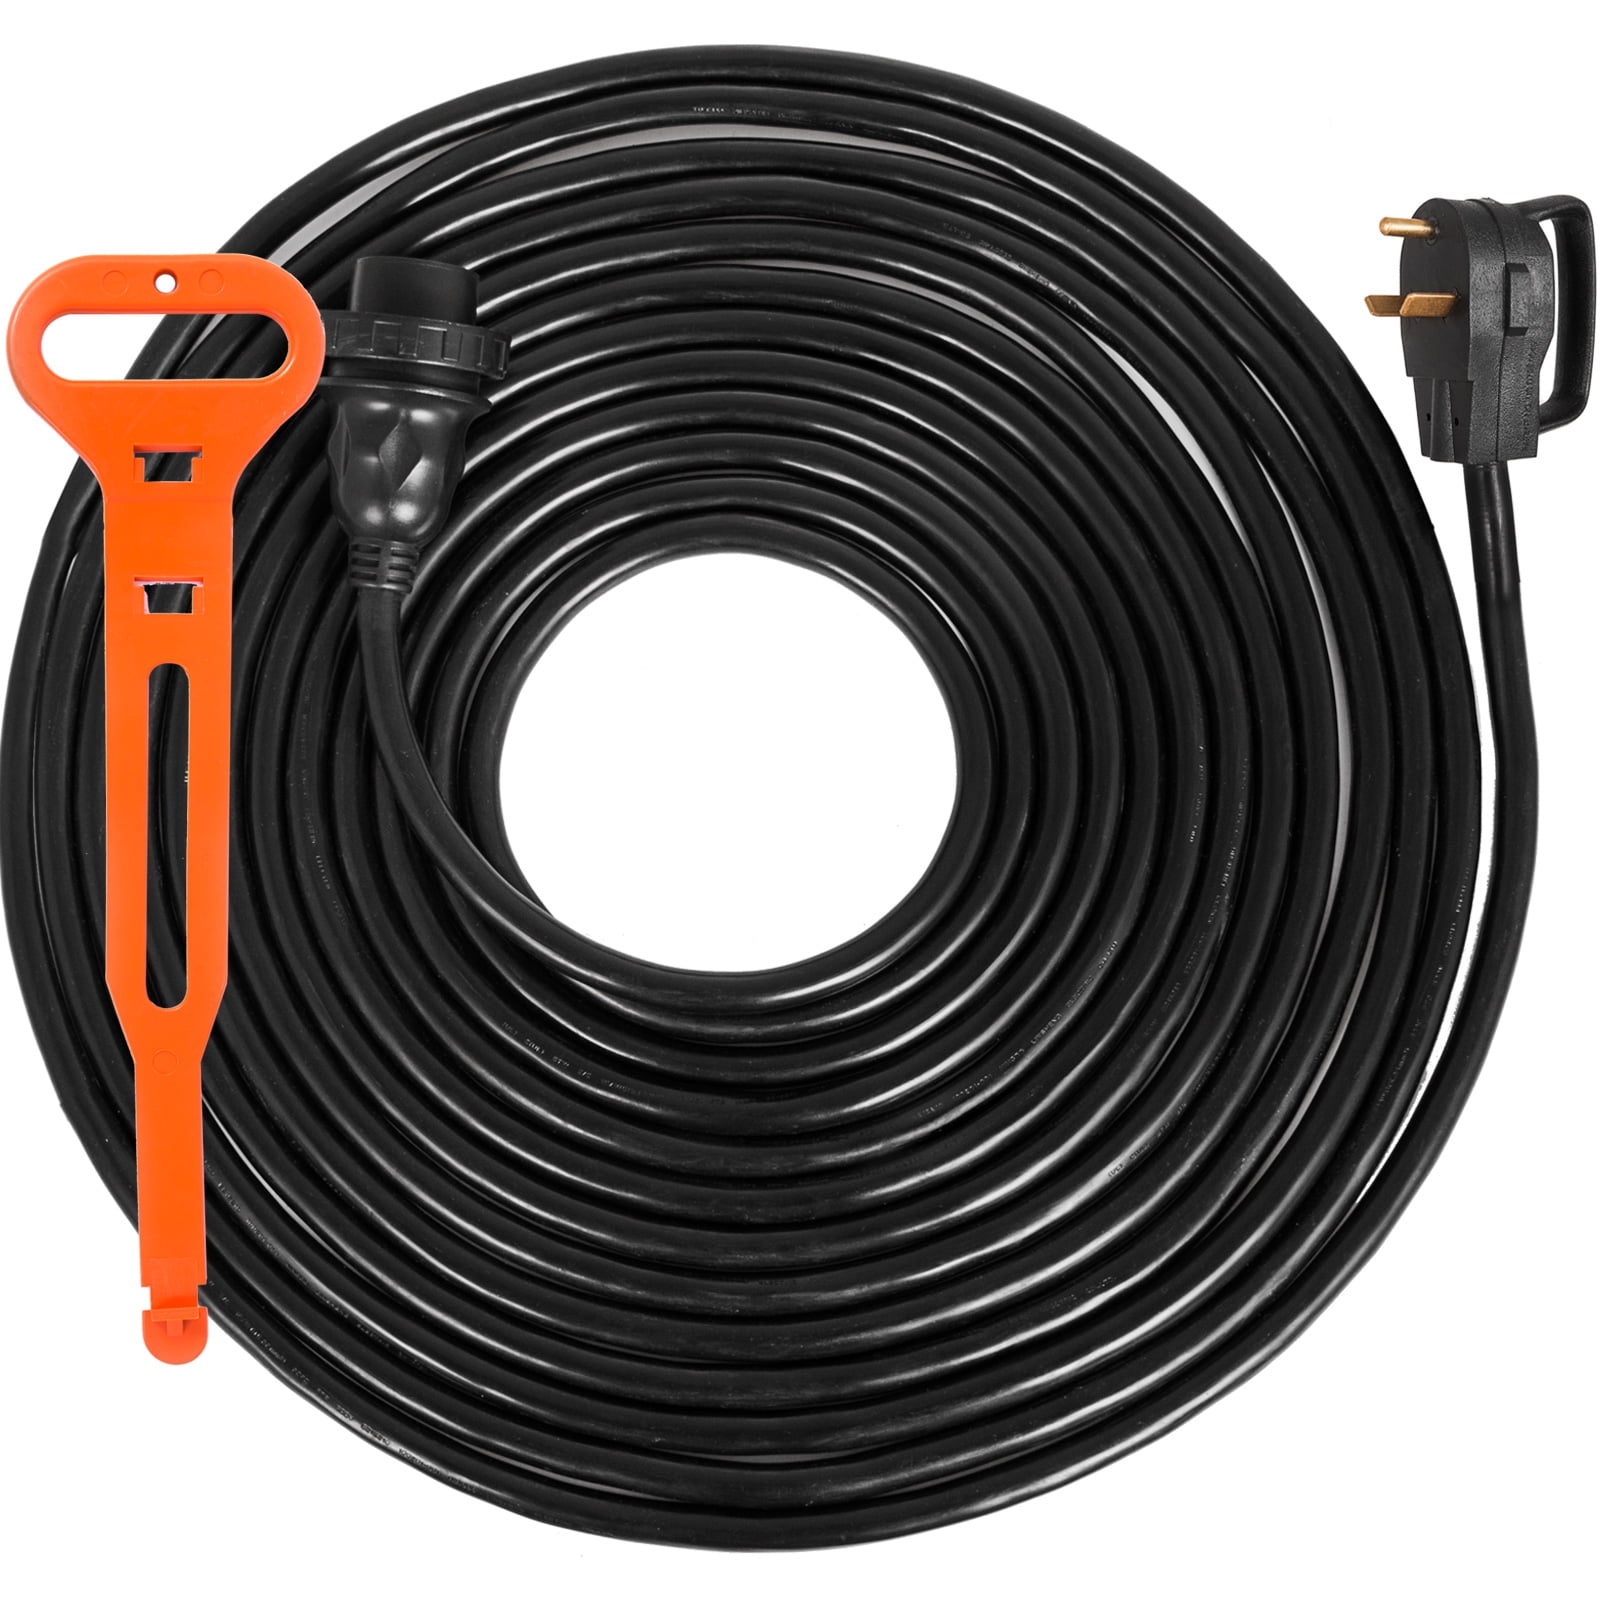 Details about   RV Power Extension Cord 30Amp Male TT-30P To 30Amp Female TT-30R 30Ft